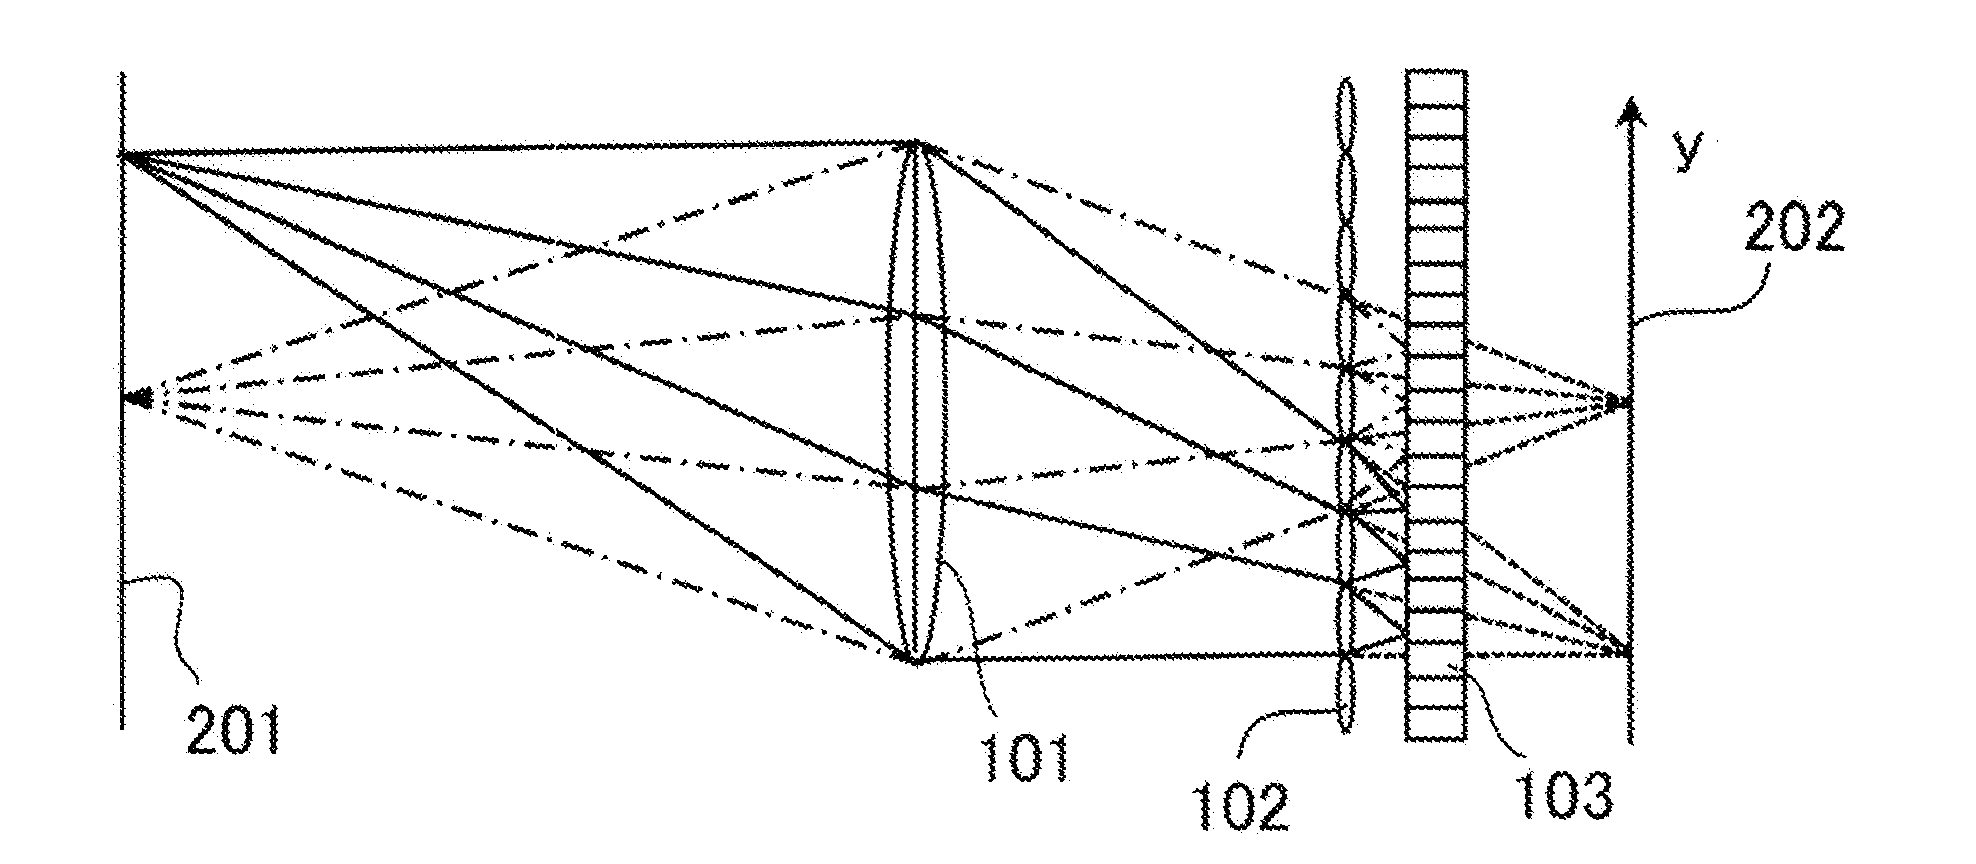 Image pickup apparatus having lens array and image pickup optical system